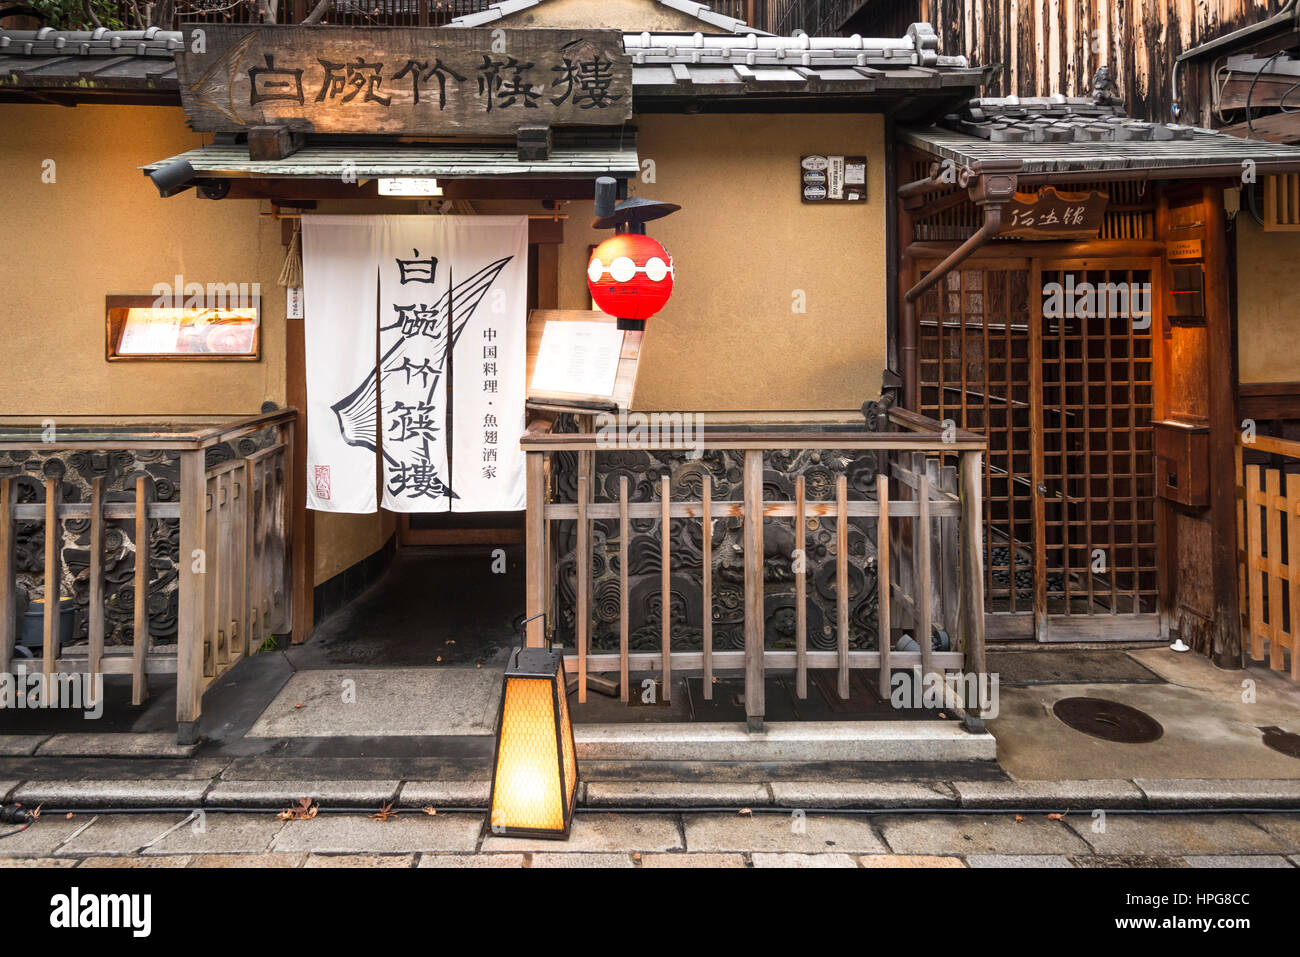 Entrance to a Chinese restaurant in Gion District, Kyoto, Japan Stock Photo